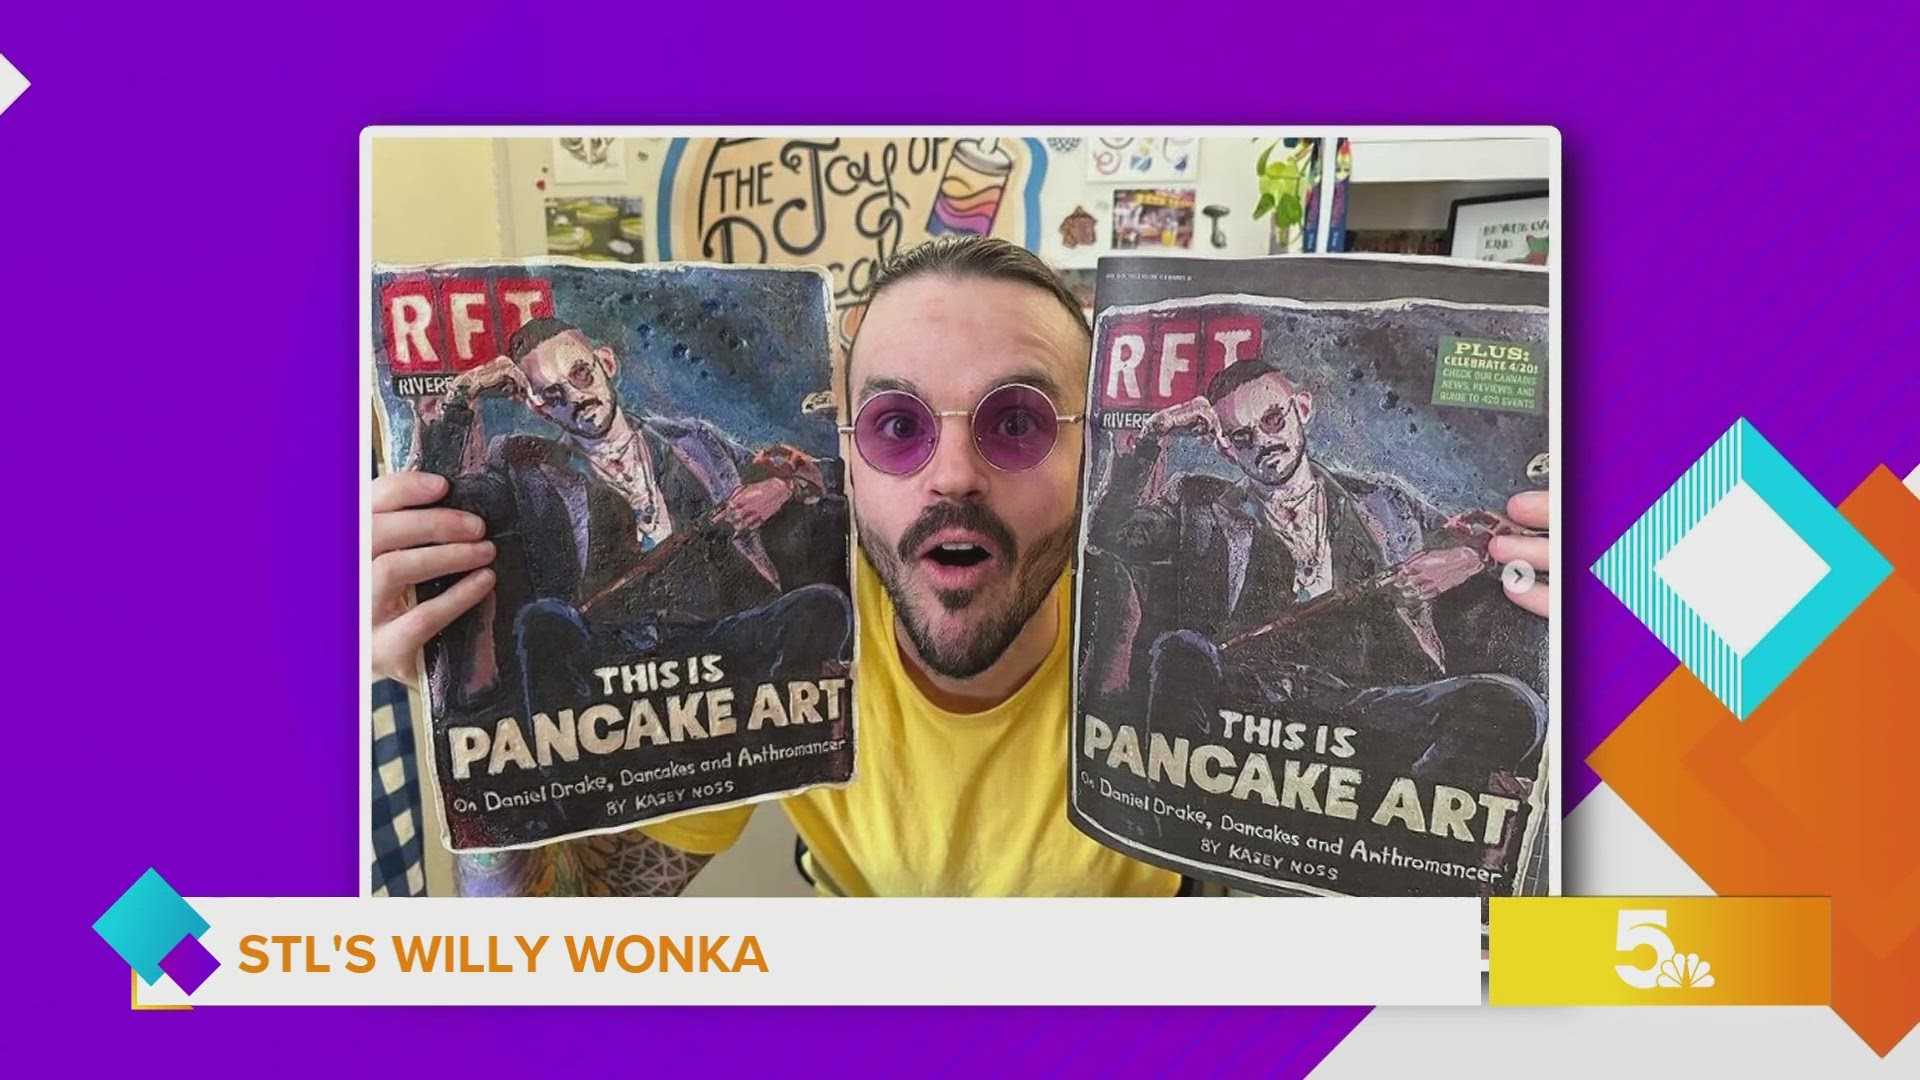 Whether it’s pancakes or board games, it seems like STL’s Willy Wonka can’t stop creating.